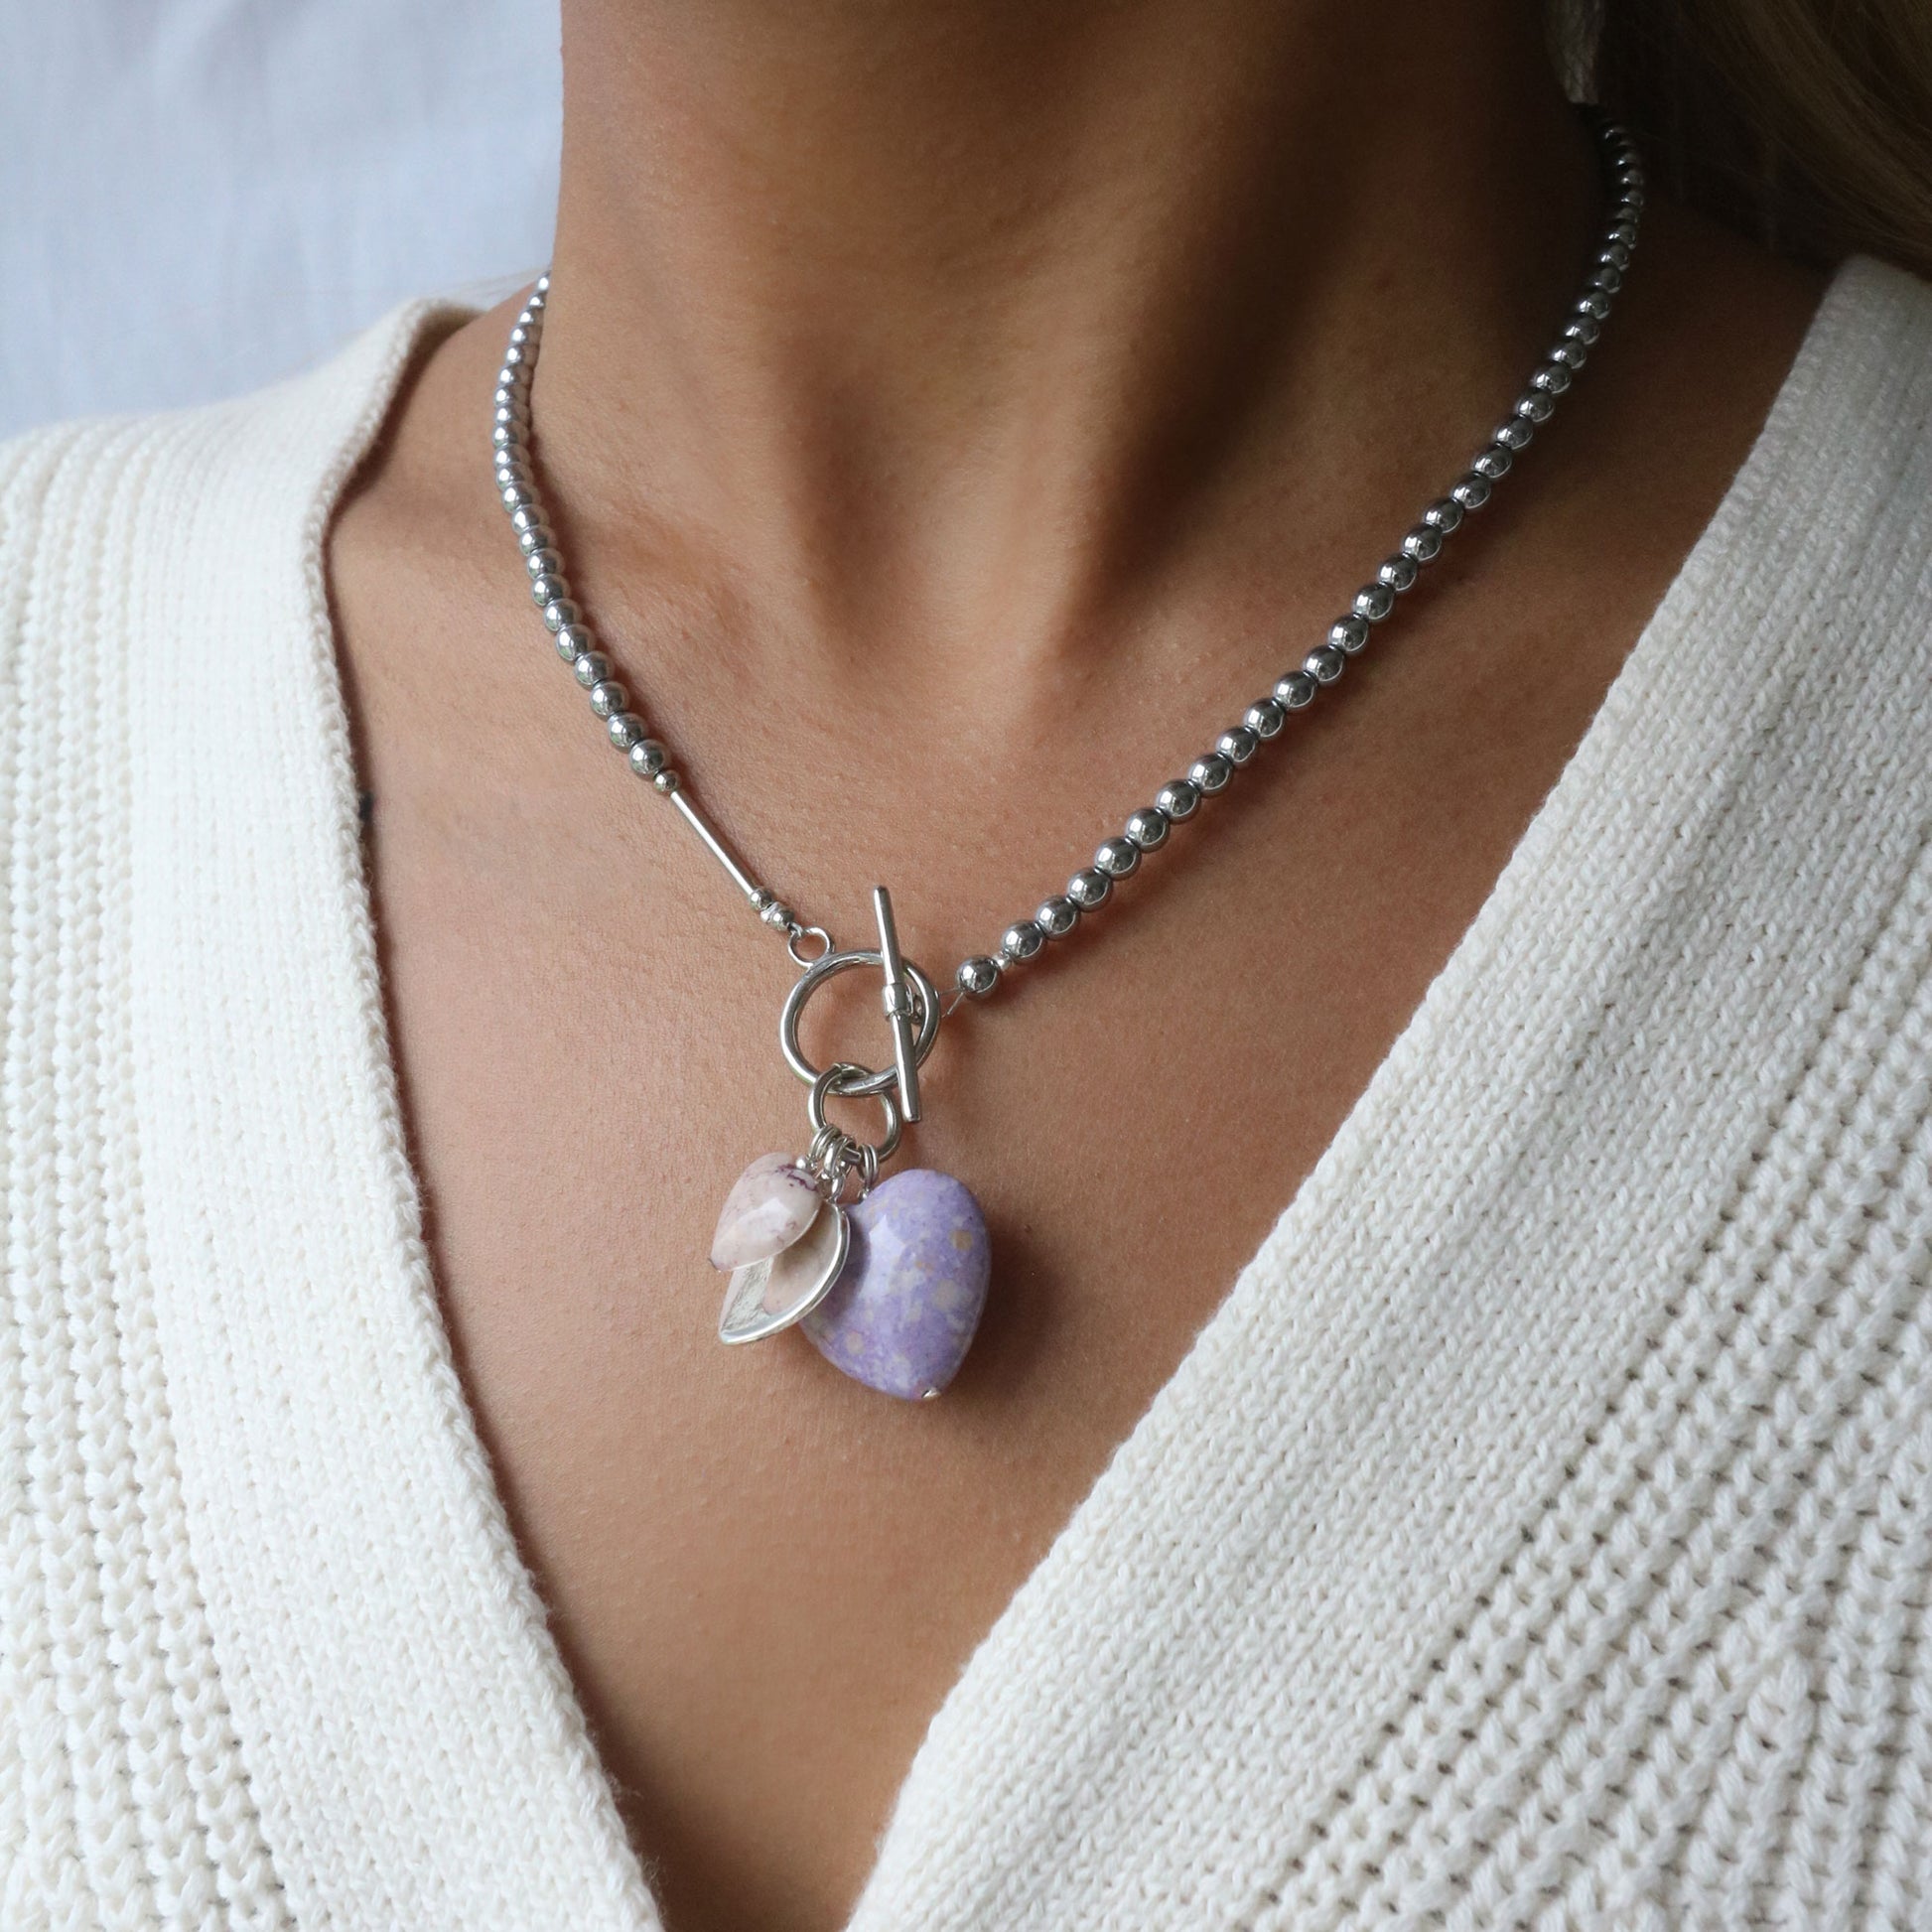 Lavender fossil stone charms necklace